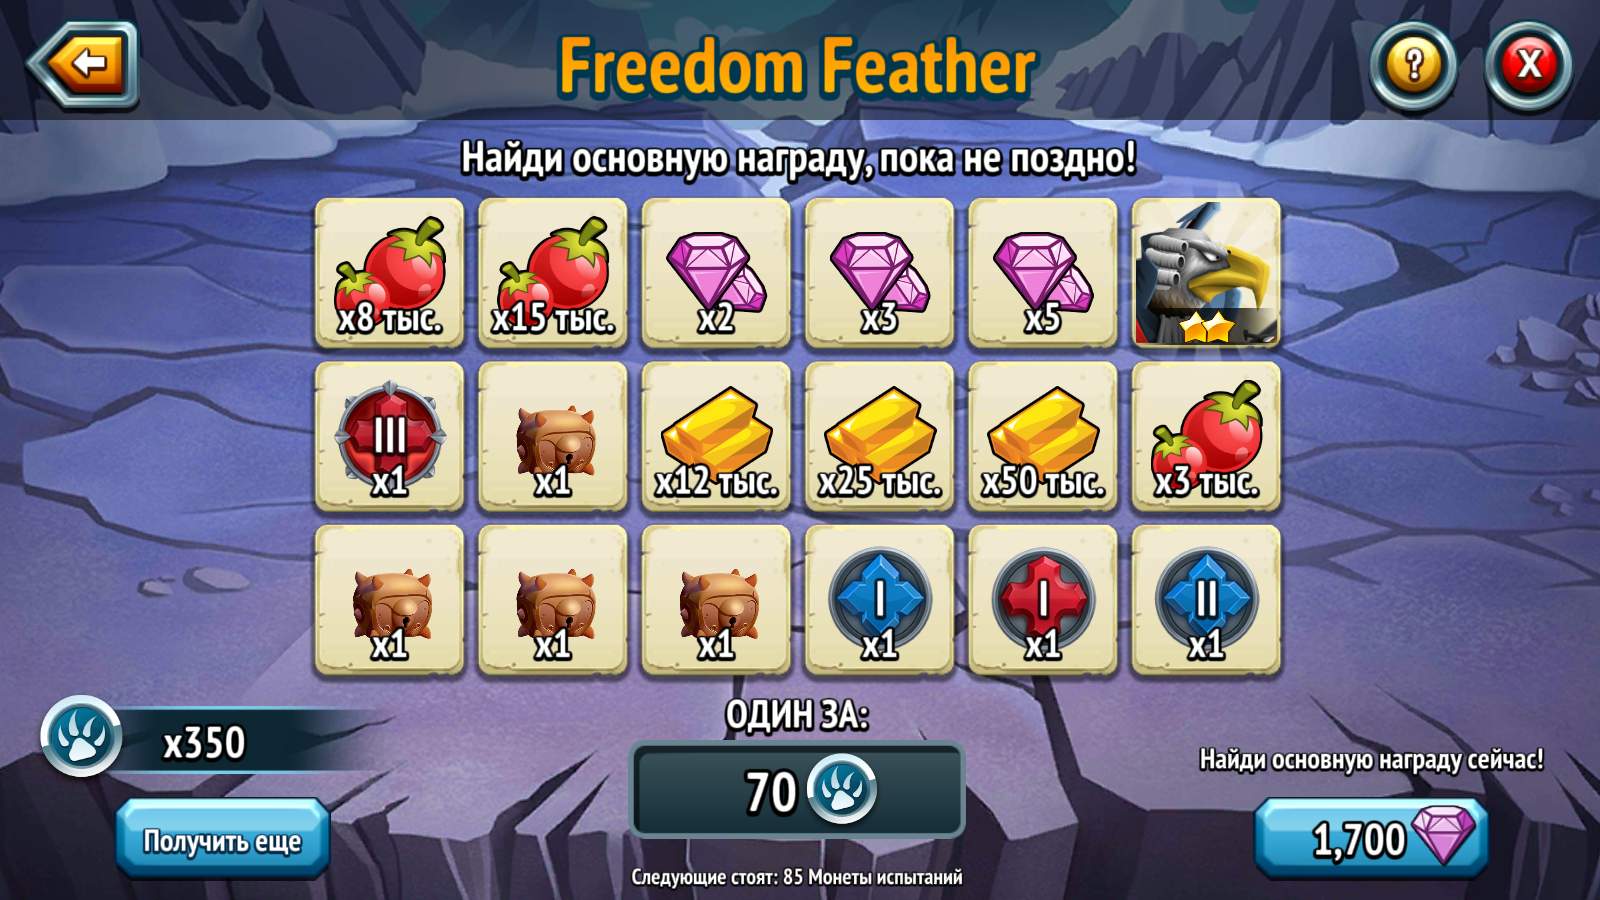 Freedom Feather